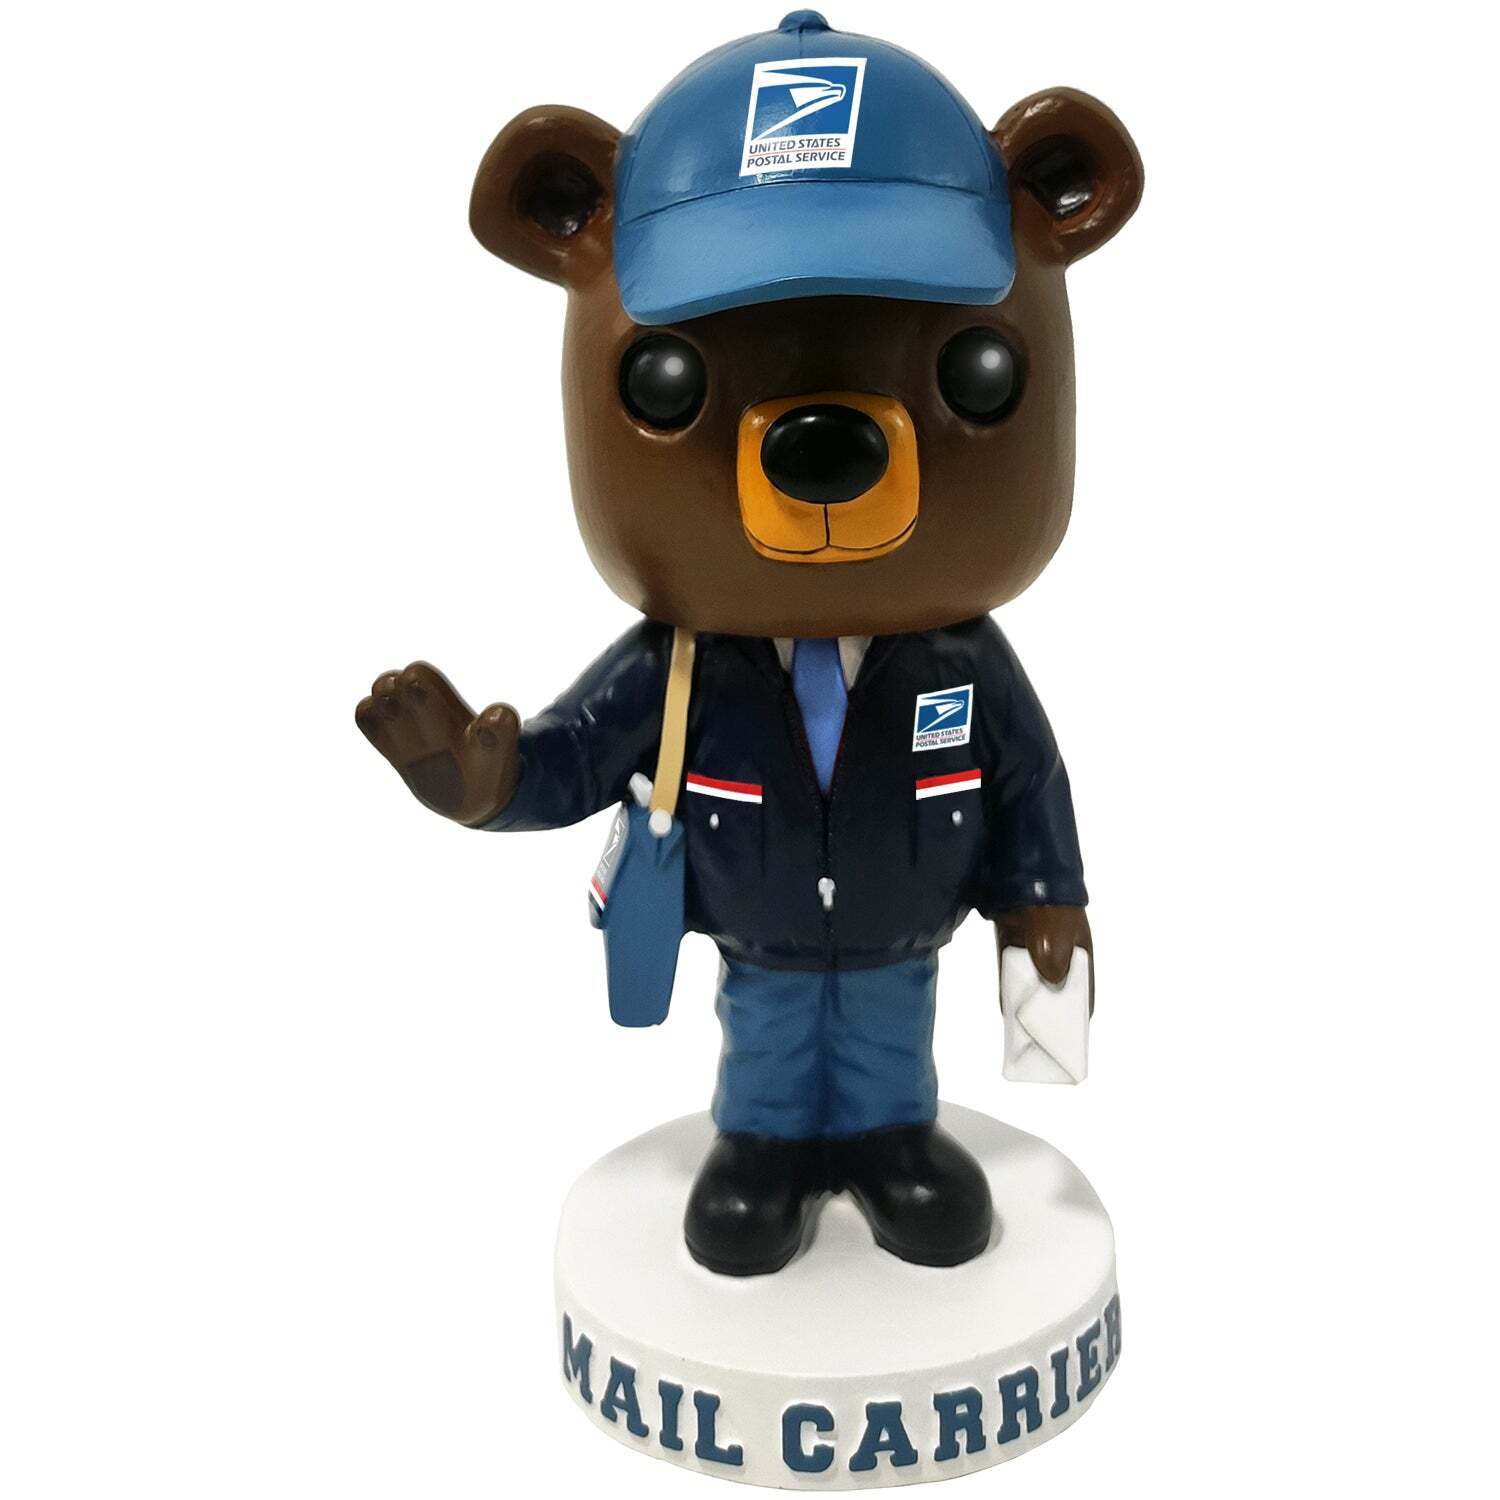 Bear Mail Carrier USPS United States Postal Service Mail Carrier Bobblehead